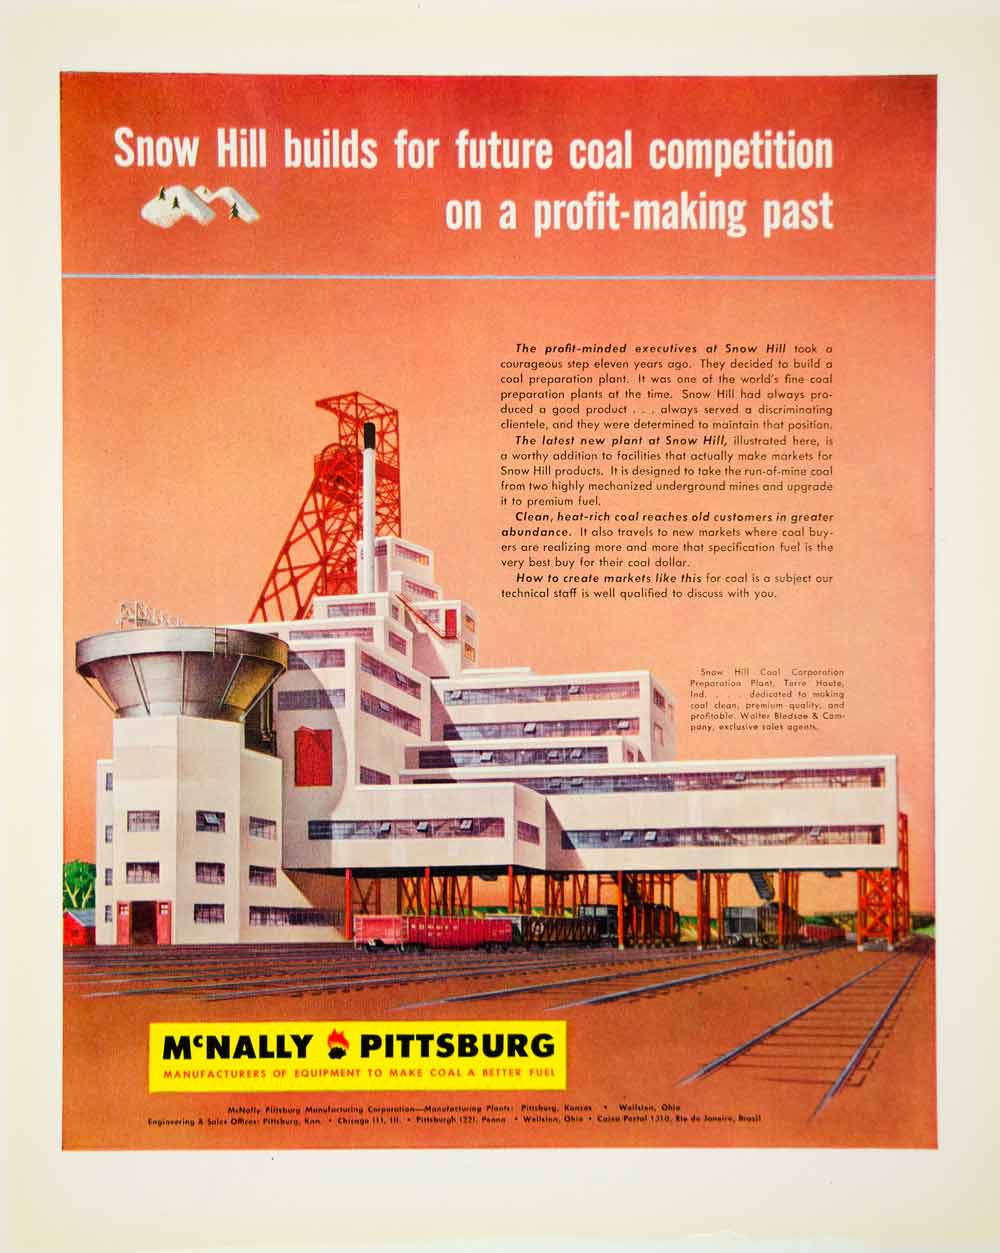 Illustrated vintage ad for McNally Pittsburgh steel mill by John C Howard.